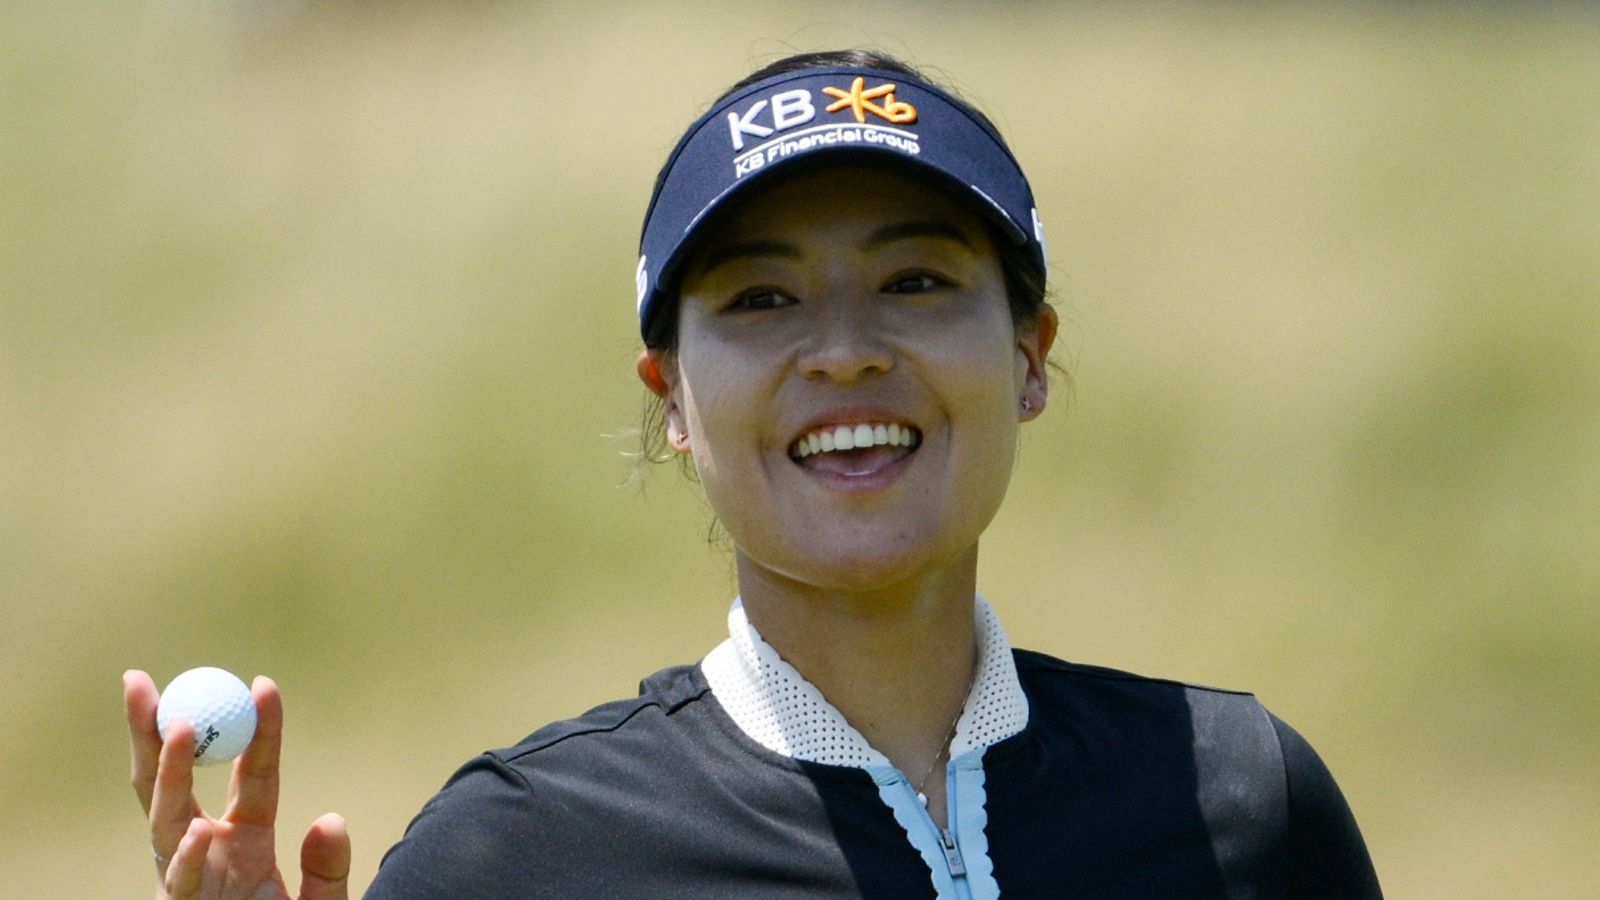 Women's PGA Championship: In Gee Chun wins title at Congressional Country Club after late Lexi Thompson collapse